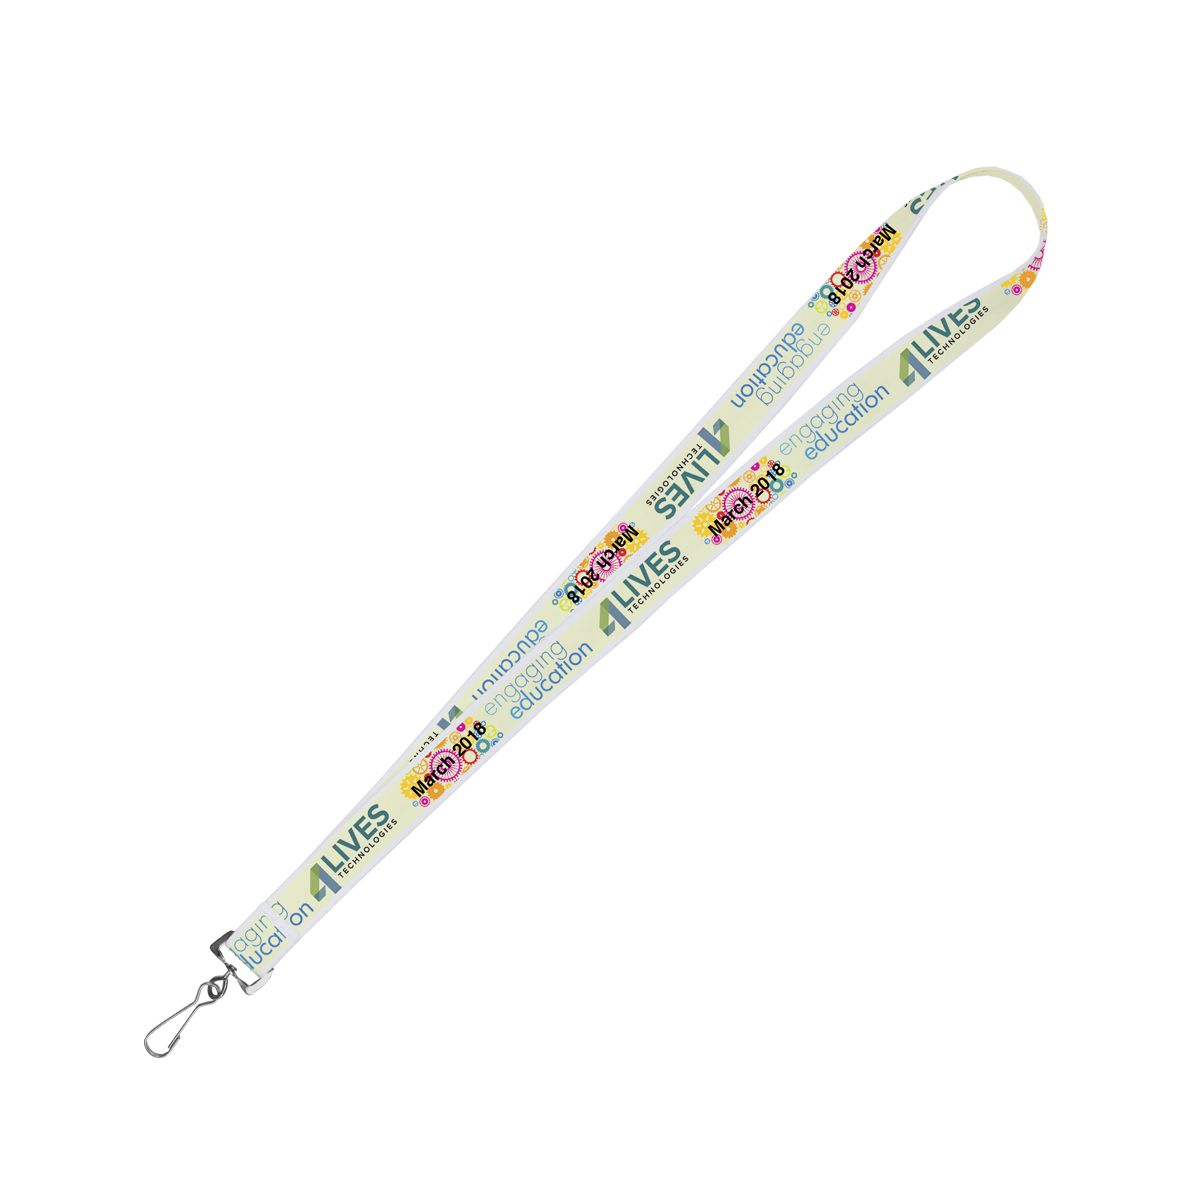 "OWEN" 3/4” Super Soft Polyester Multi-Color Sublimation Lanyard (Overseas Production 8-10 Weeks)